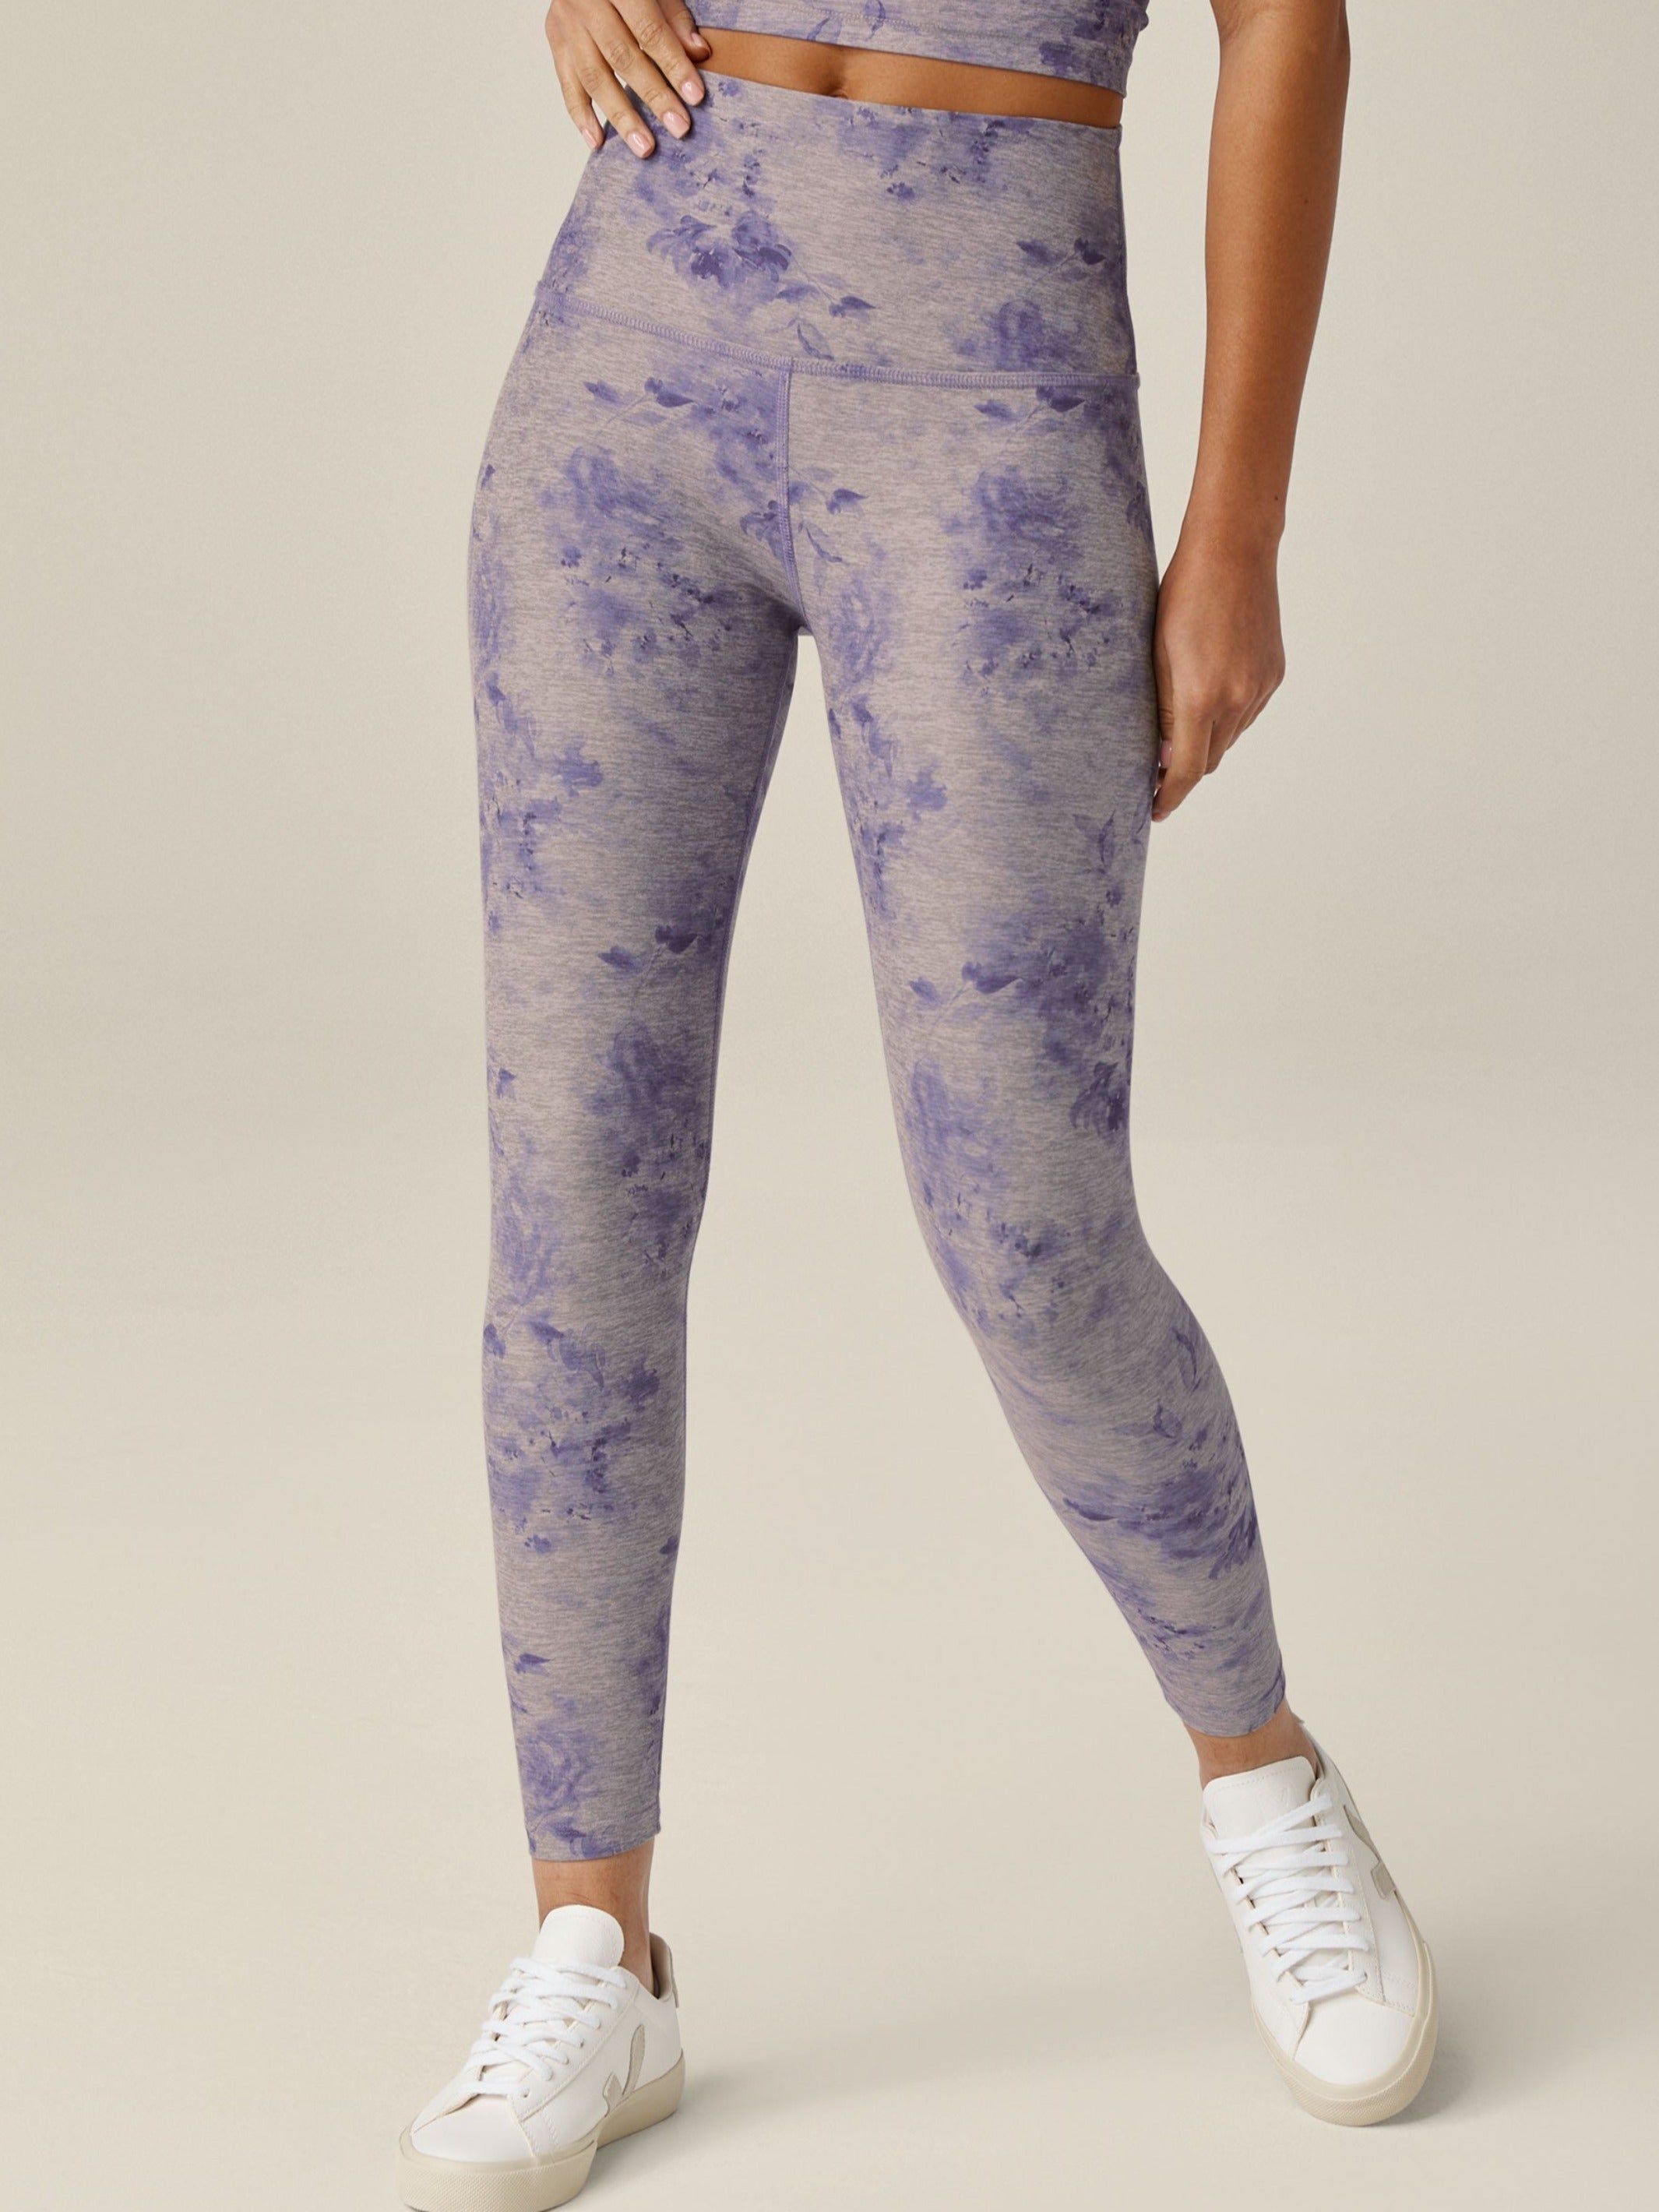 Softmark High Waisted Leggings - Romantic Floral – OMgoing